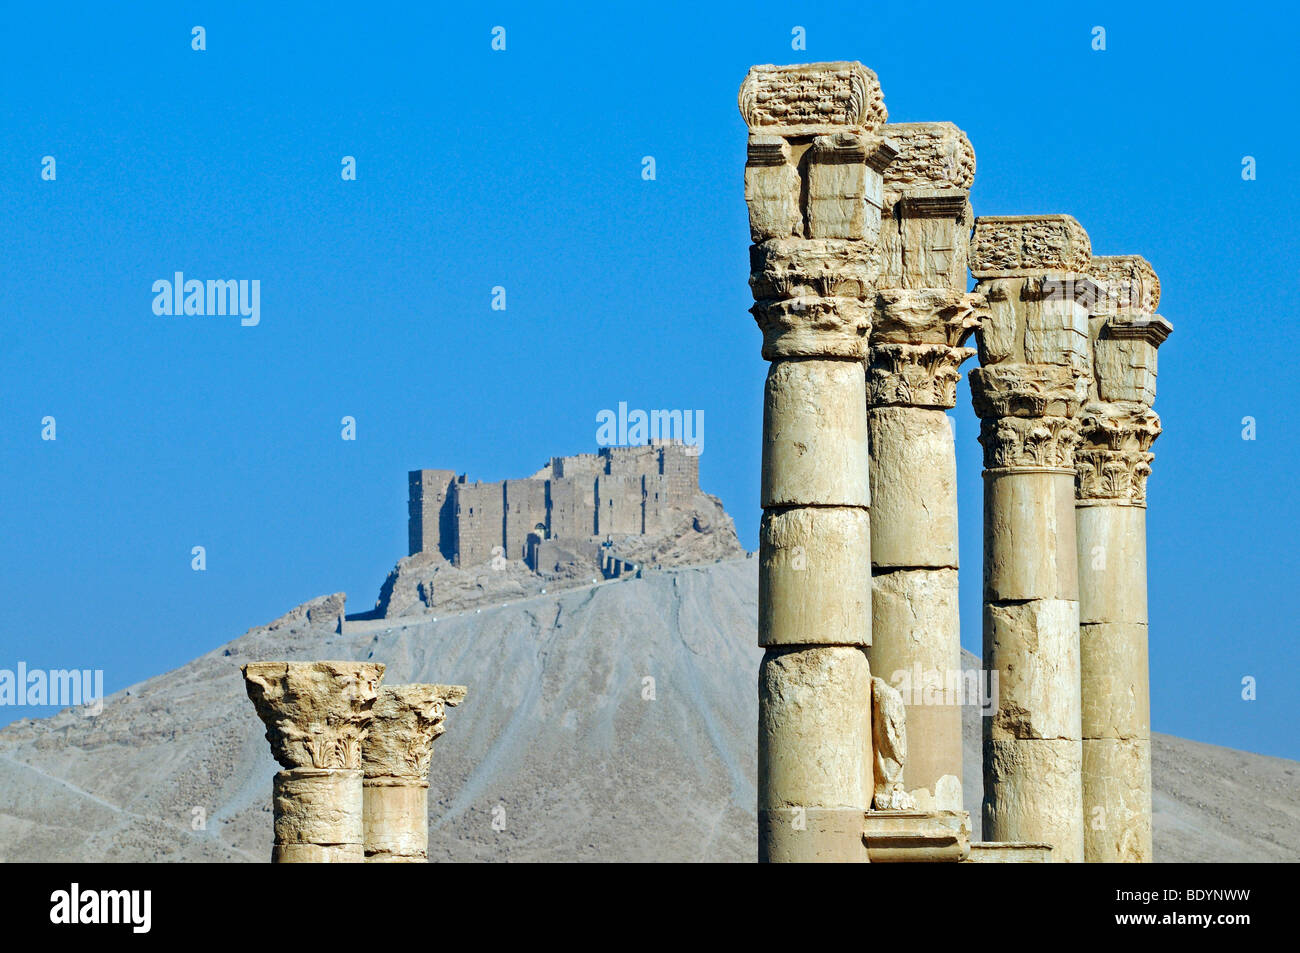 Ruins of the Palmyra archeological site, in the back Qala'at Ibn Ma'n castle, Tadmur, Syria, Asia Stock Photo